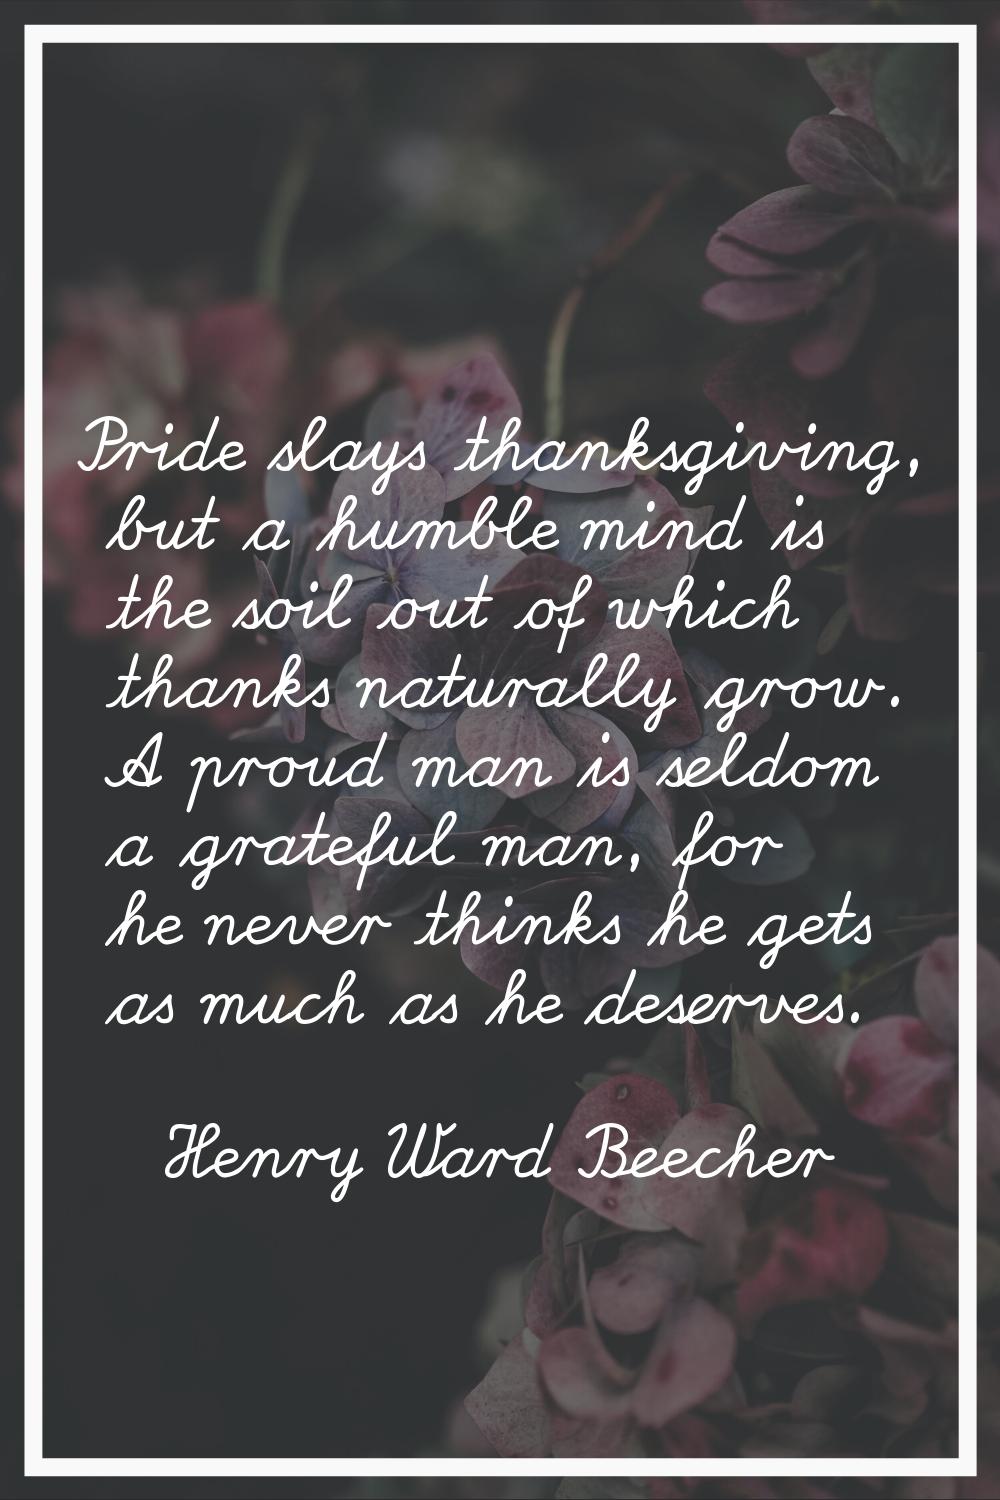 Pride slays thanksgiving, but a humble mind is the soil out of which thanks naturally grow. A proud